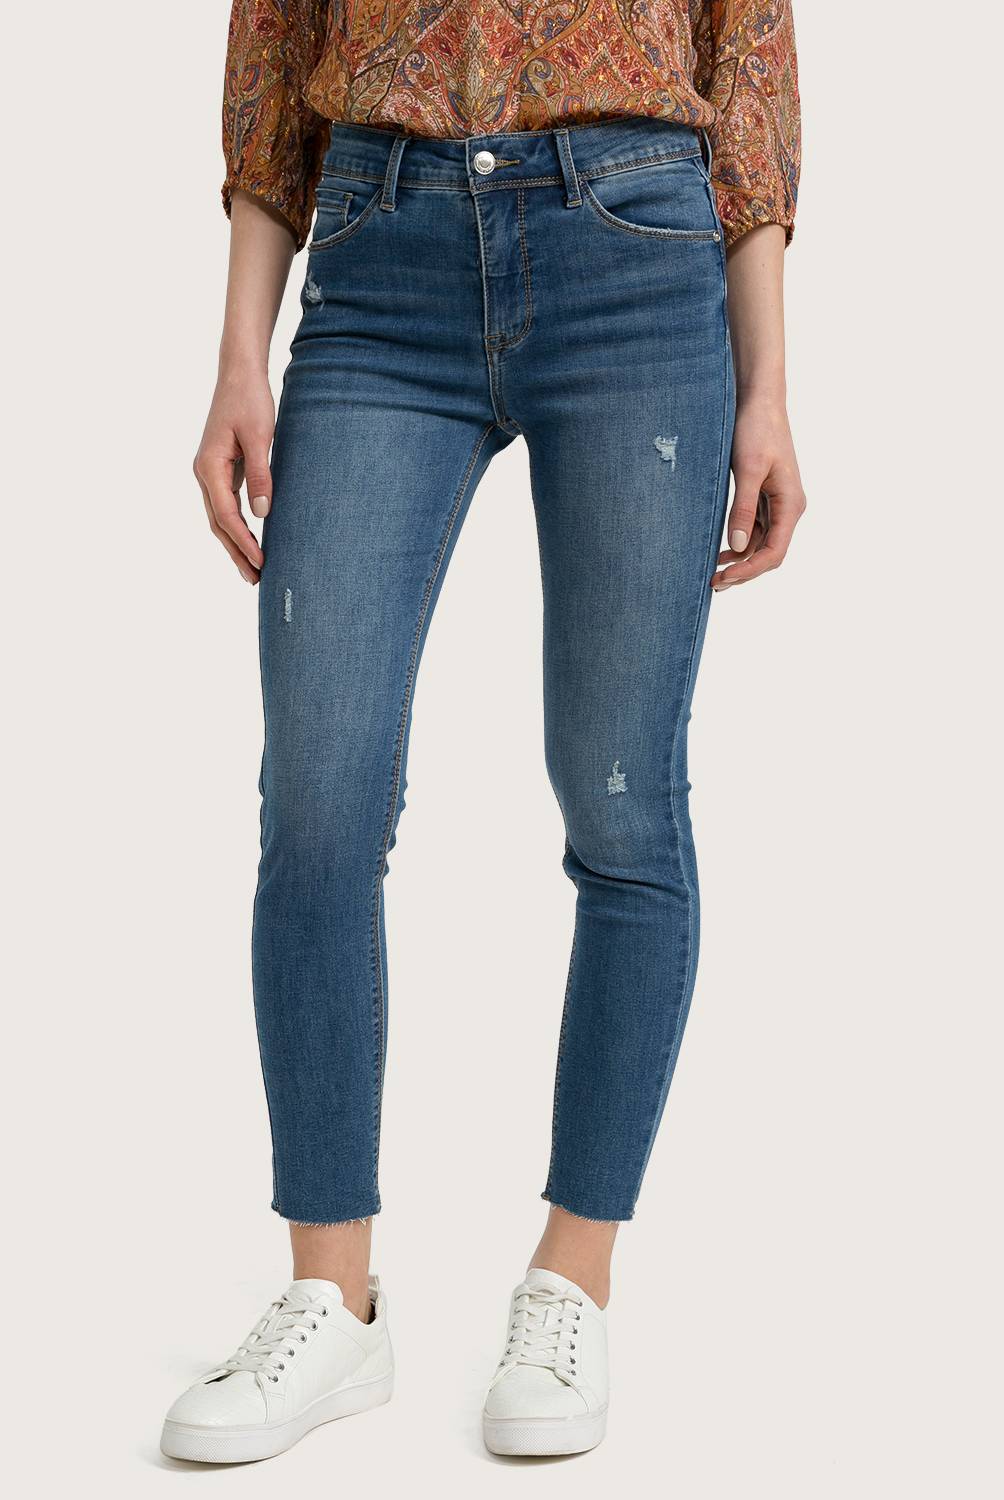 BASEMENT - Jeans Mujer